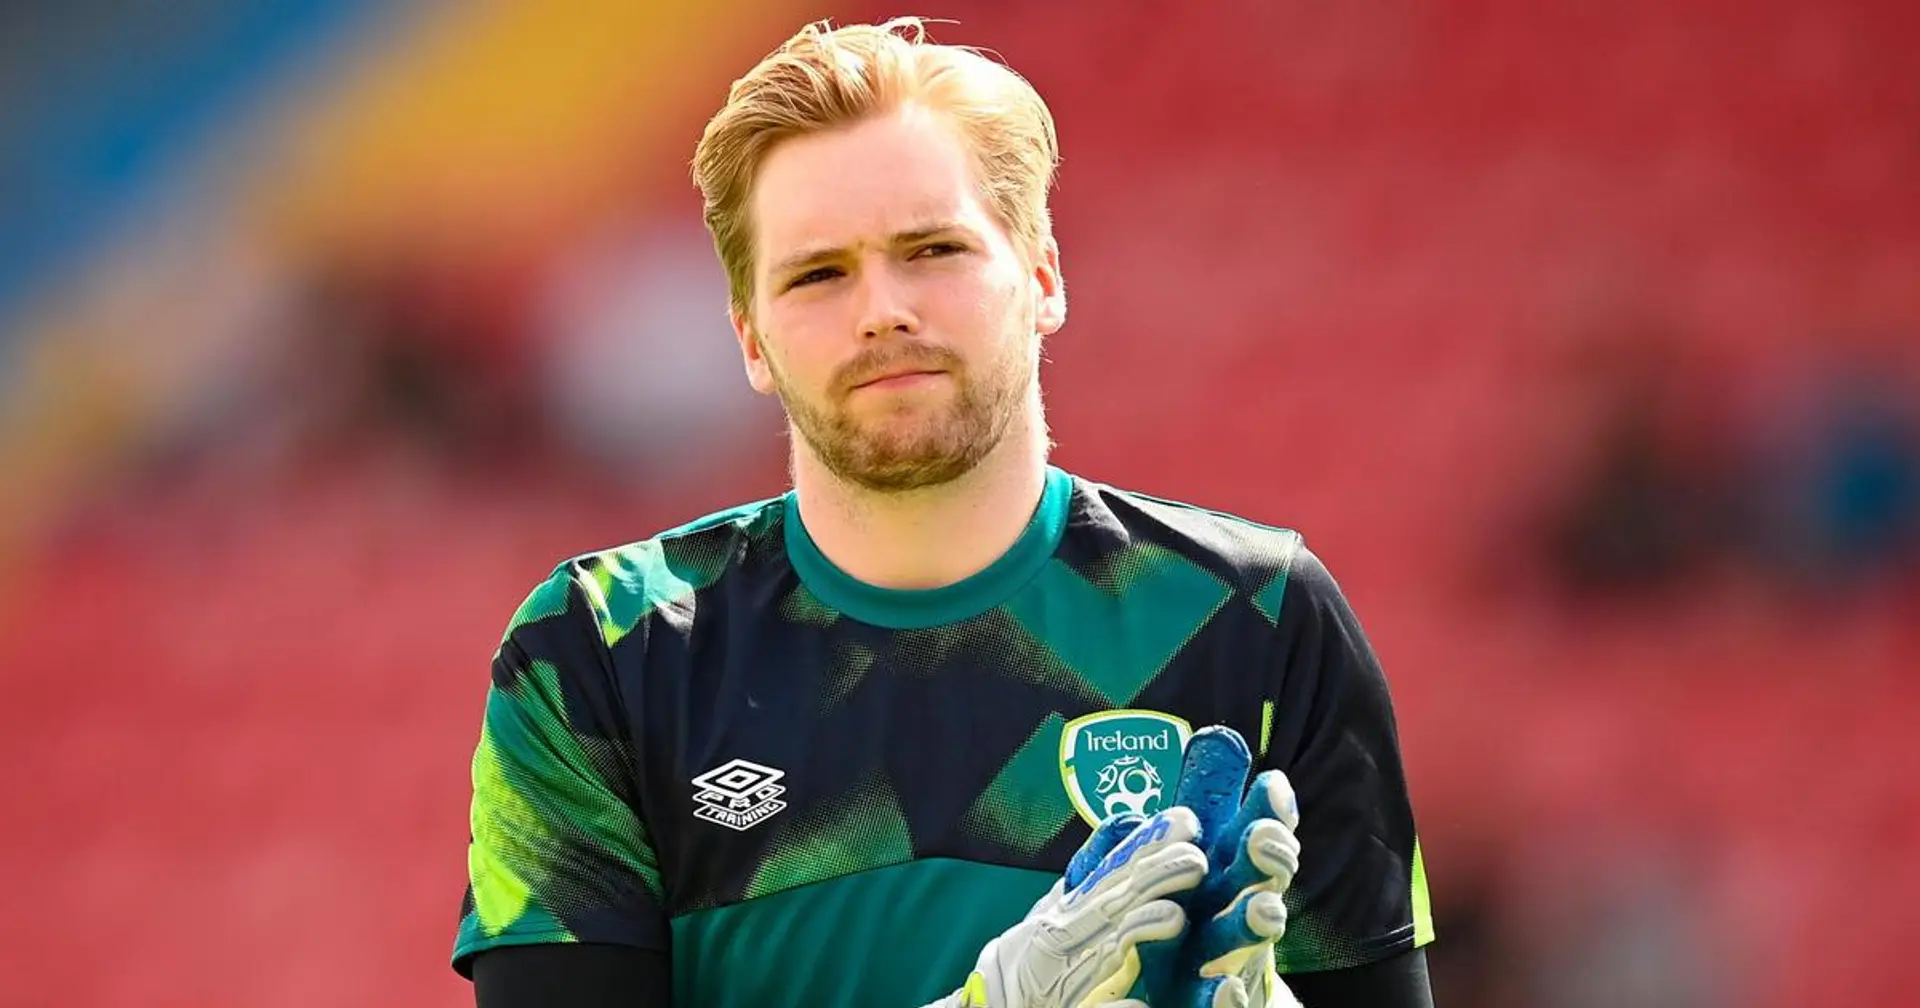 Liverpool 'have no intention' of letting Caoimhin Kelleher leave (reliability: 5 stars)